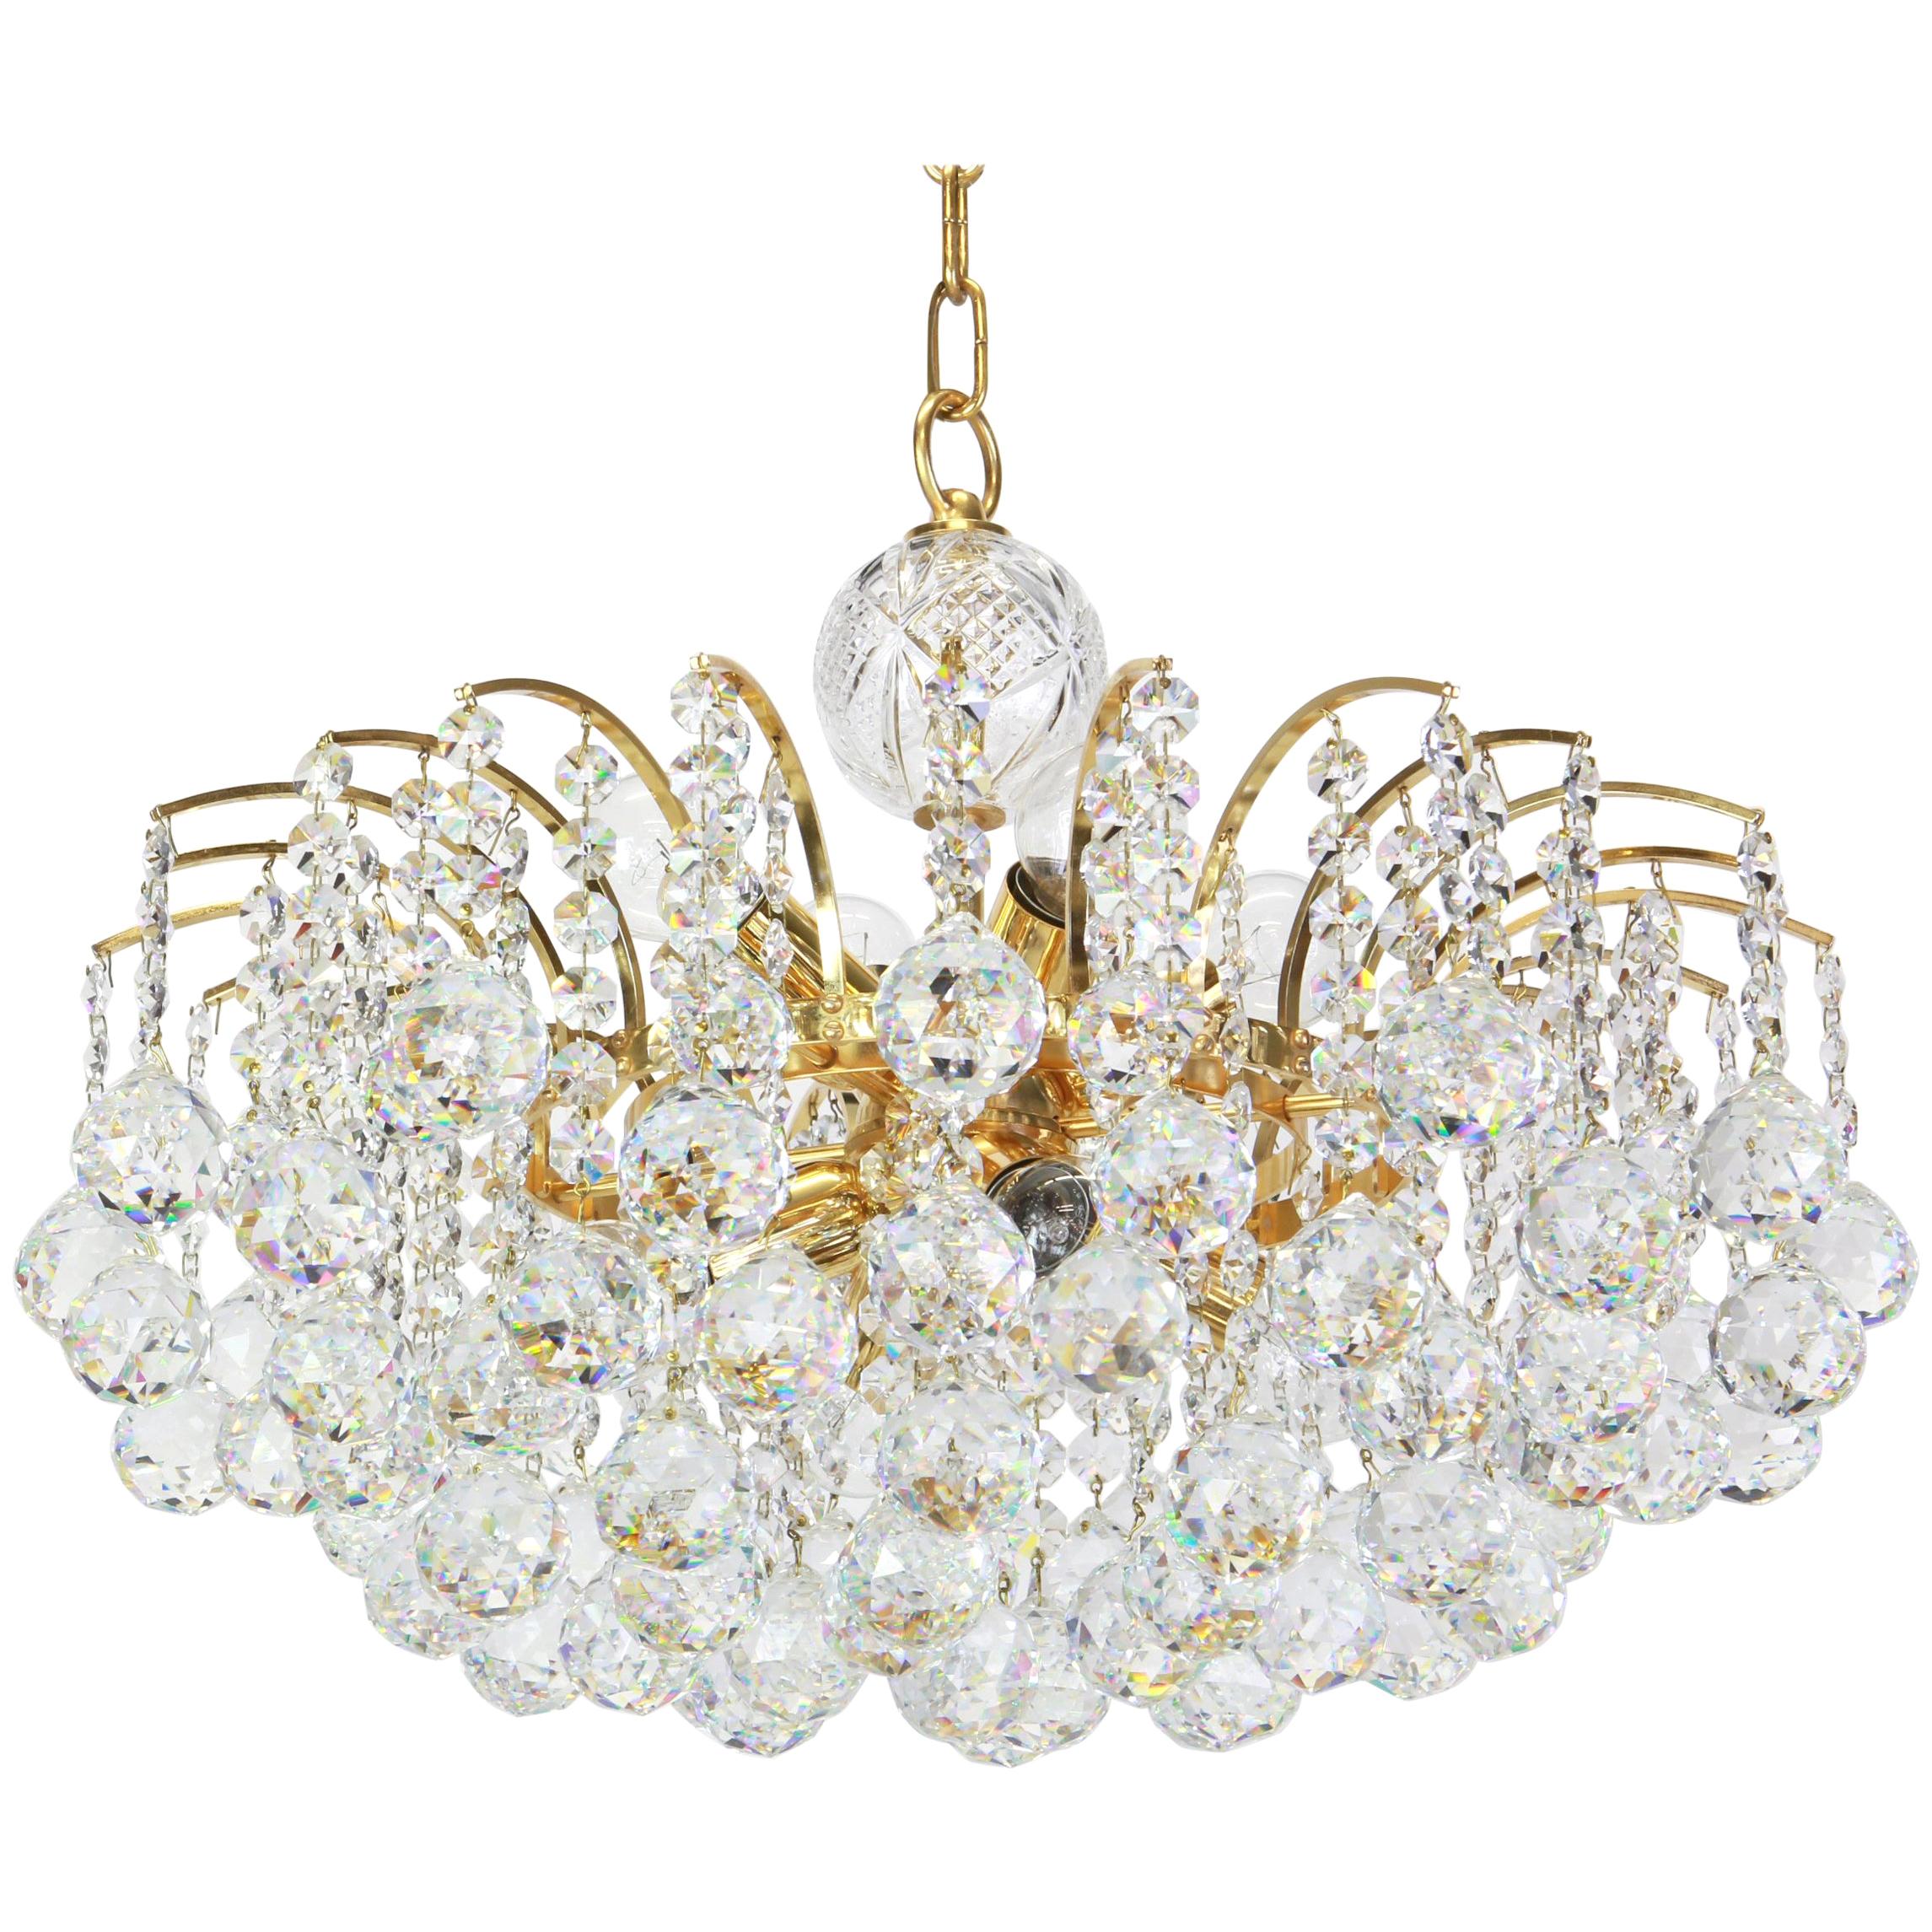 Beautiful Christoph Palme Chandelier Midcentury Crystal Balls, 1970s For Sale